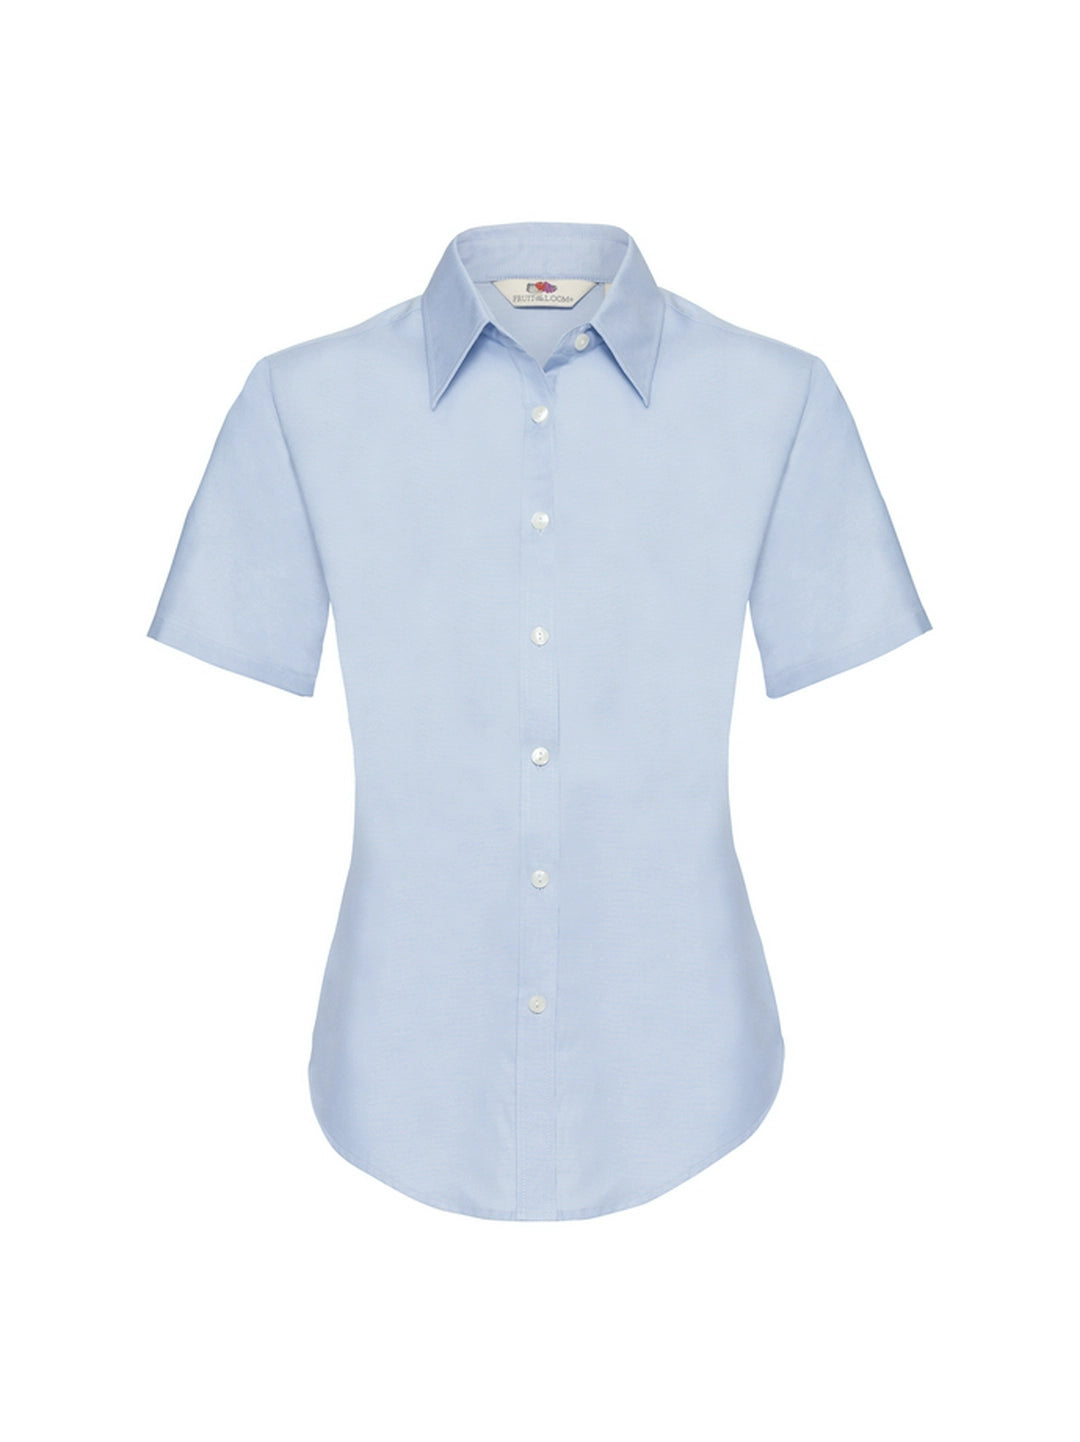 Fruit Of The Loom 65000 Ladies Oxford Short Sleeve Shirt - COOZO